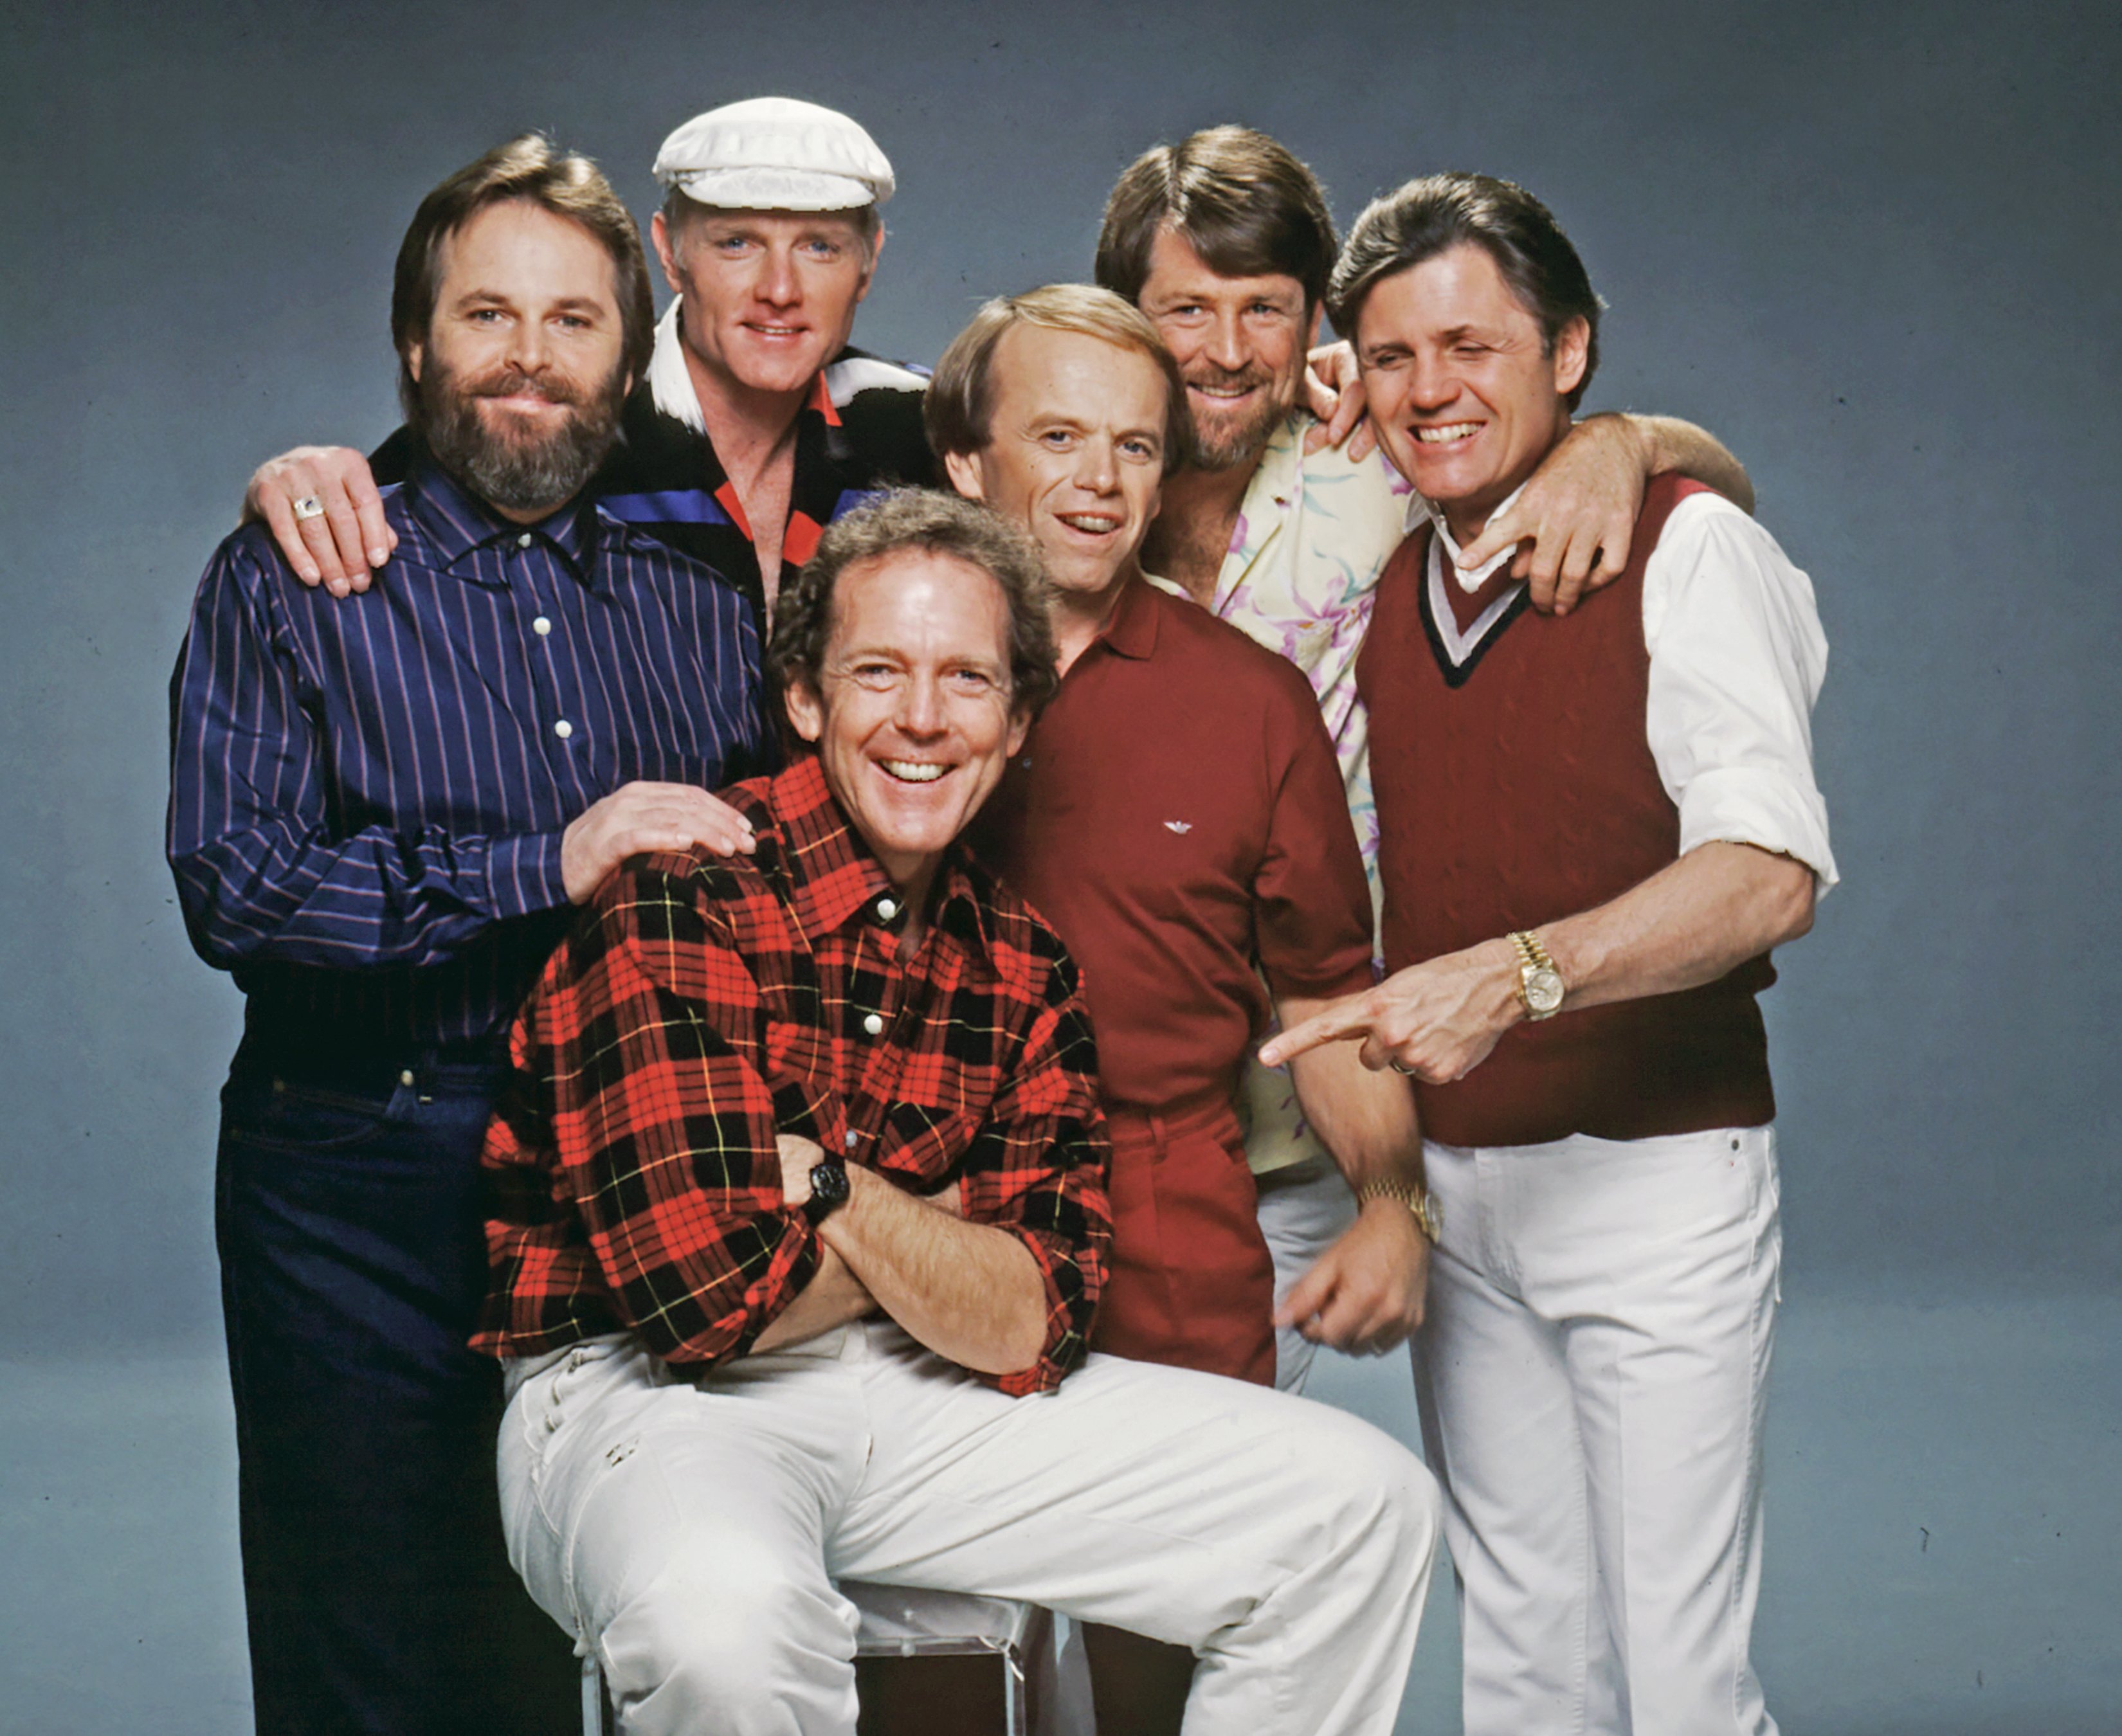 Photographer Harry Langdon poses for a portrait with the Beach Boys members Carl Wilson, Mike Love, Al Jardine, Brian Wilson, and Bruce Johnston